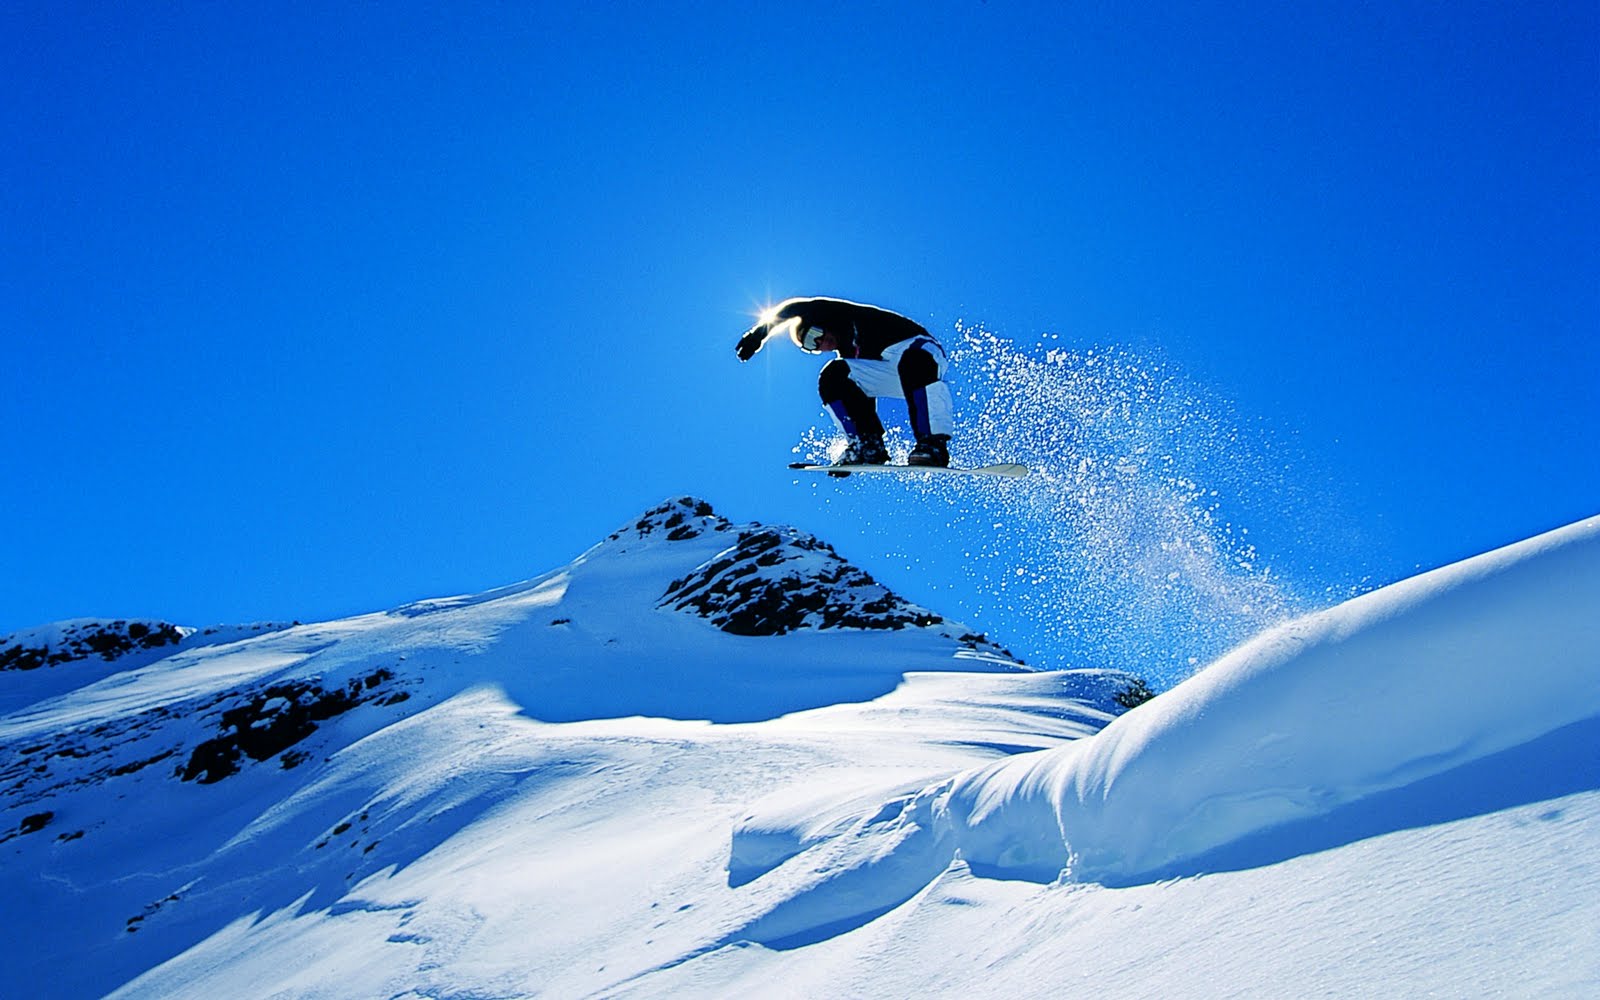 ONLY 4 WALLPAPER AMAZING EXTREME SPORTS WALLPAPER [PART 1]